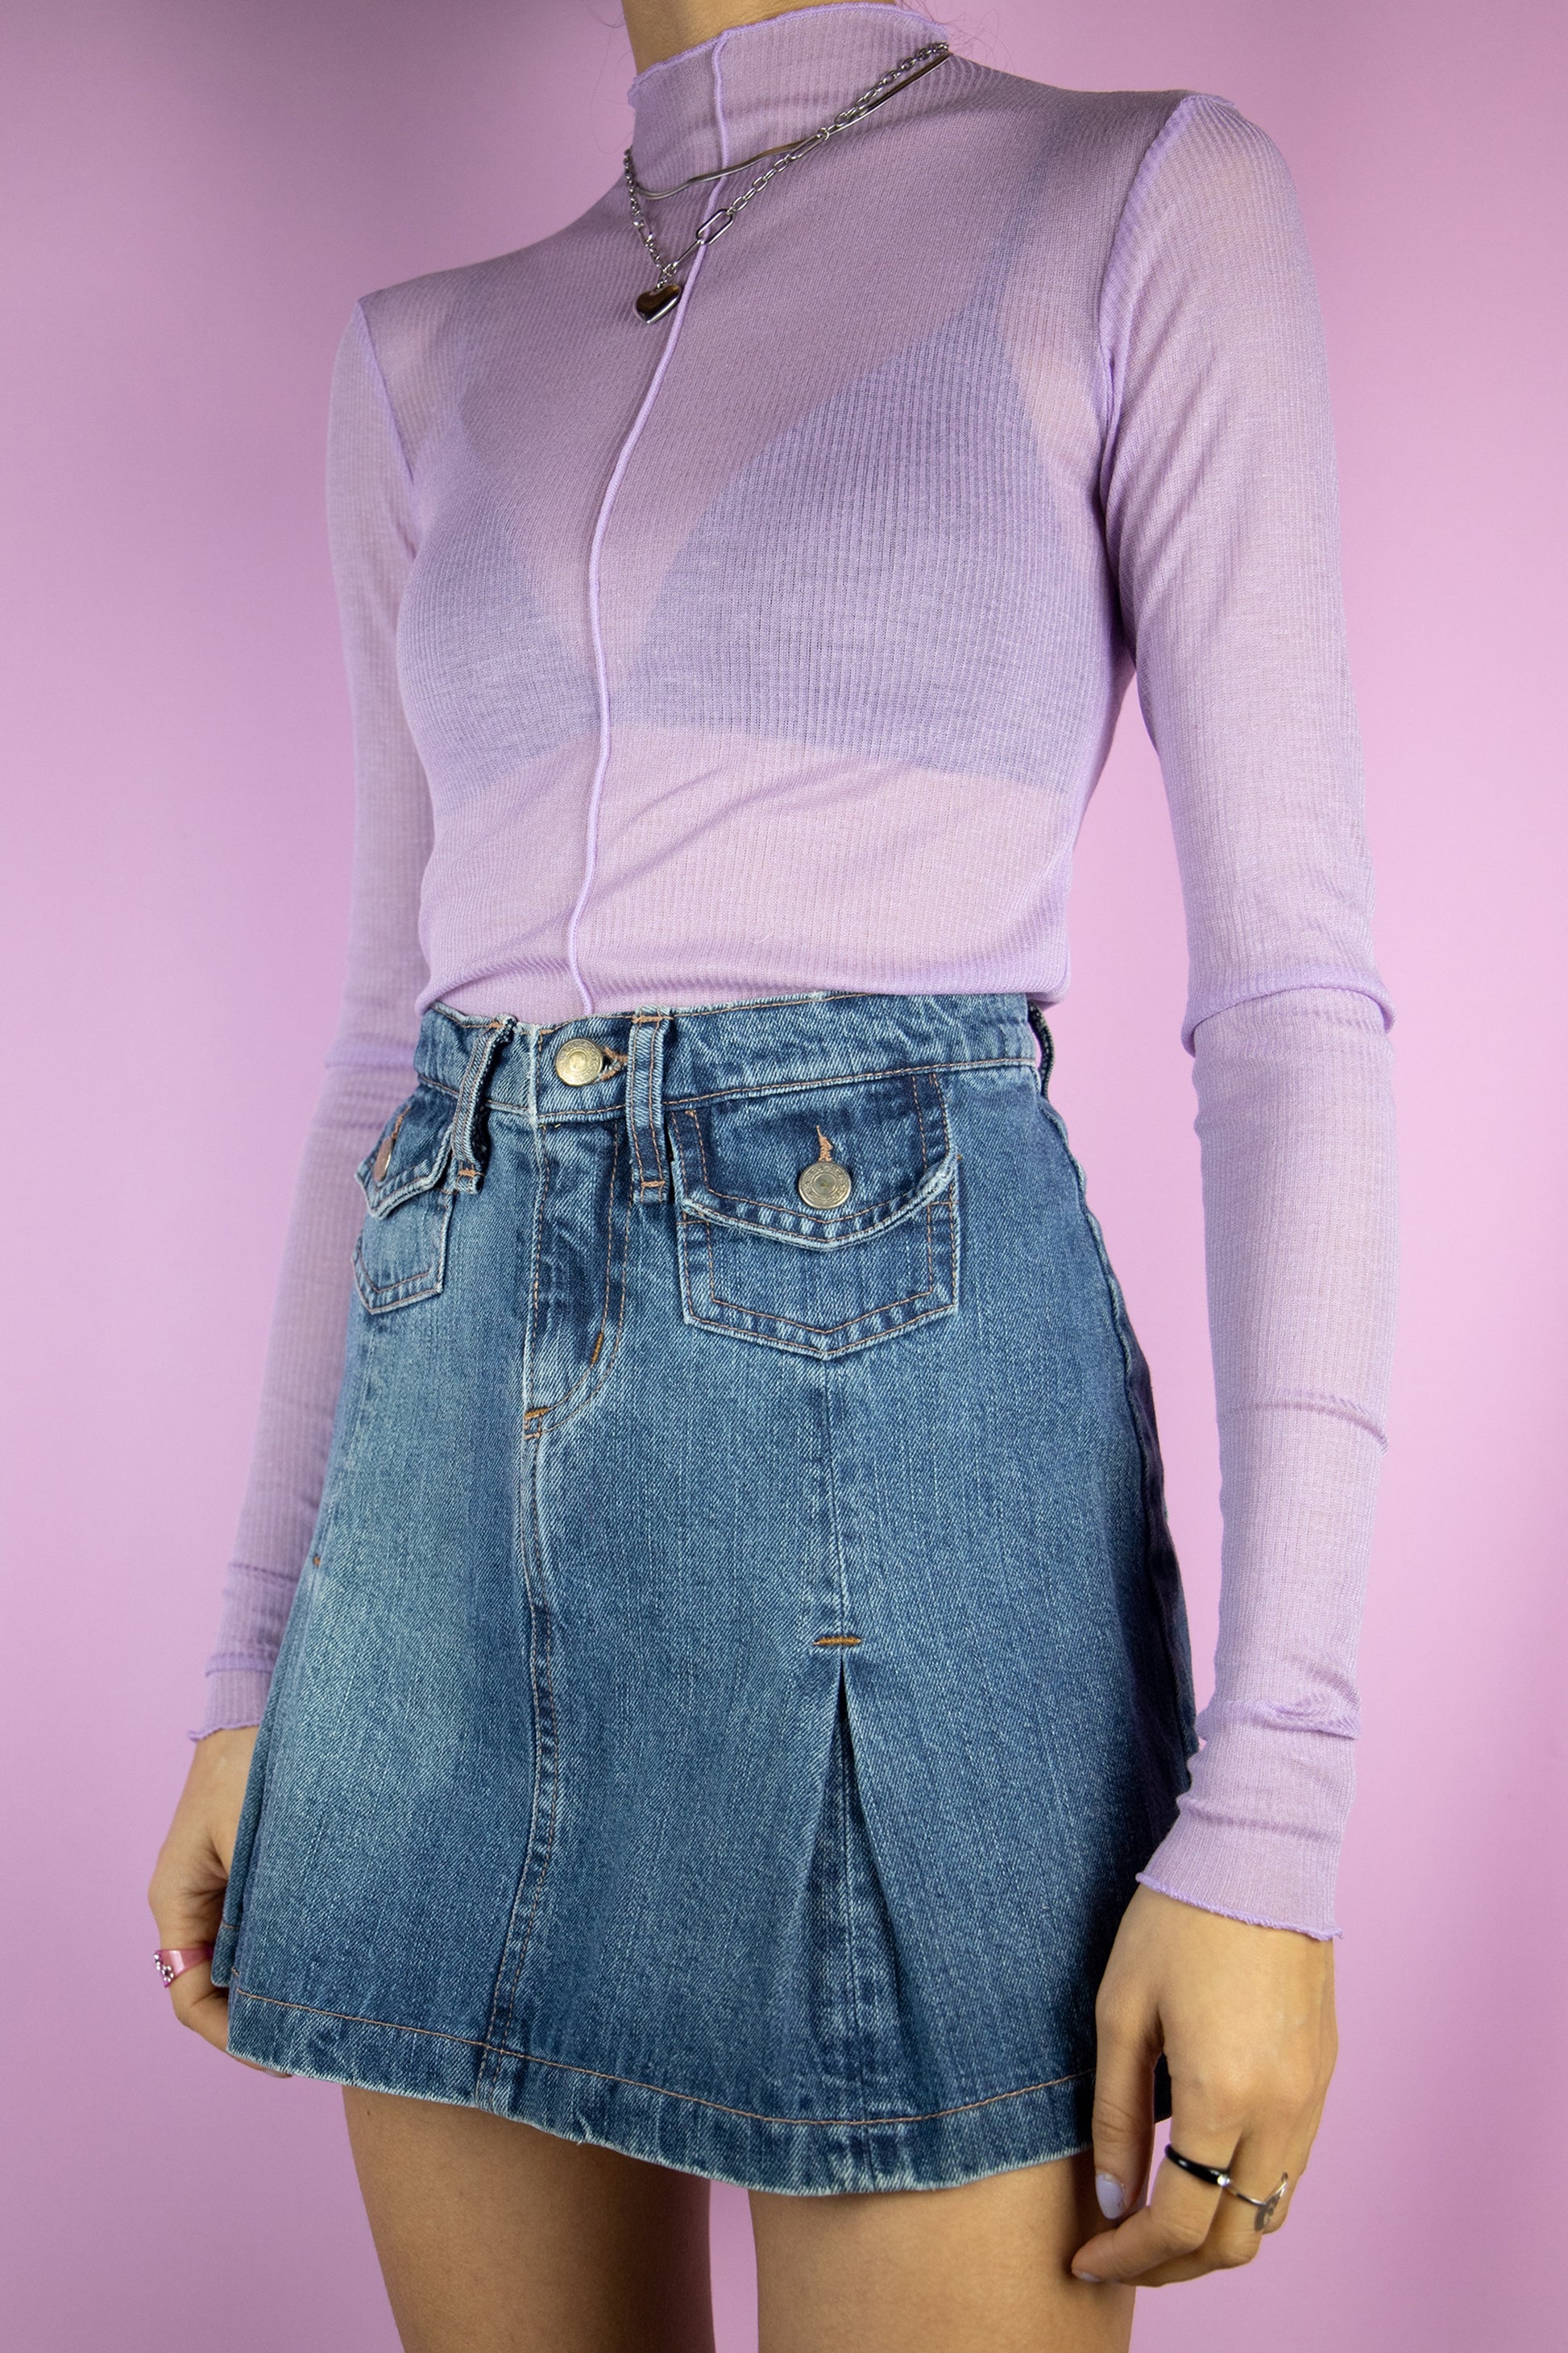 The Vintage 90s Denim Pleated Mini Skirt is a denim skirt with pleats and pockets. Cyber 2000s jean mini skirt.